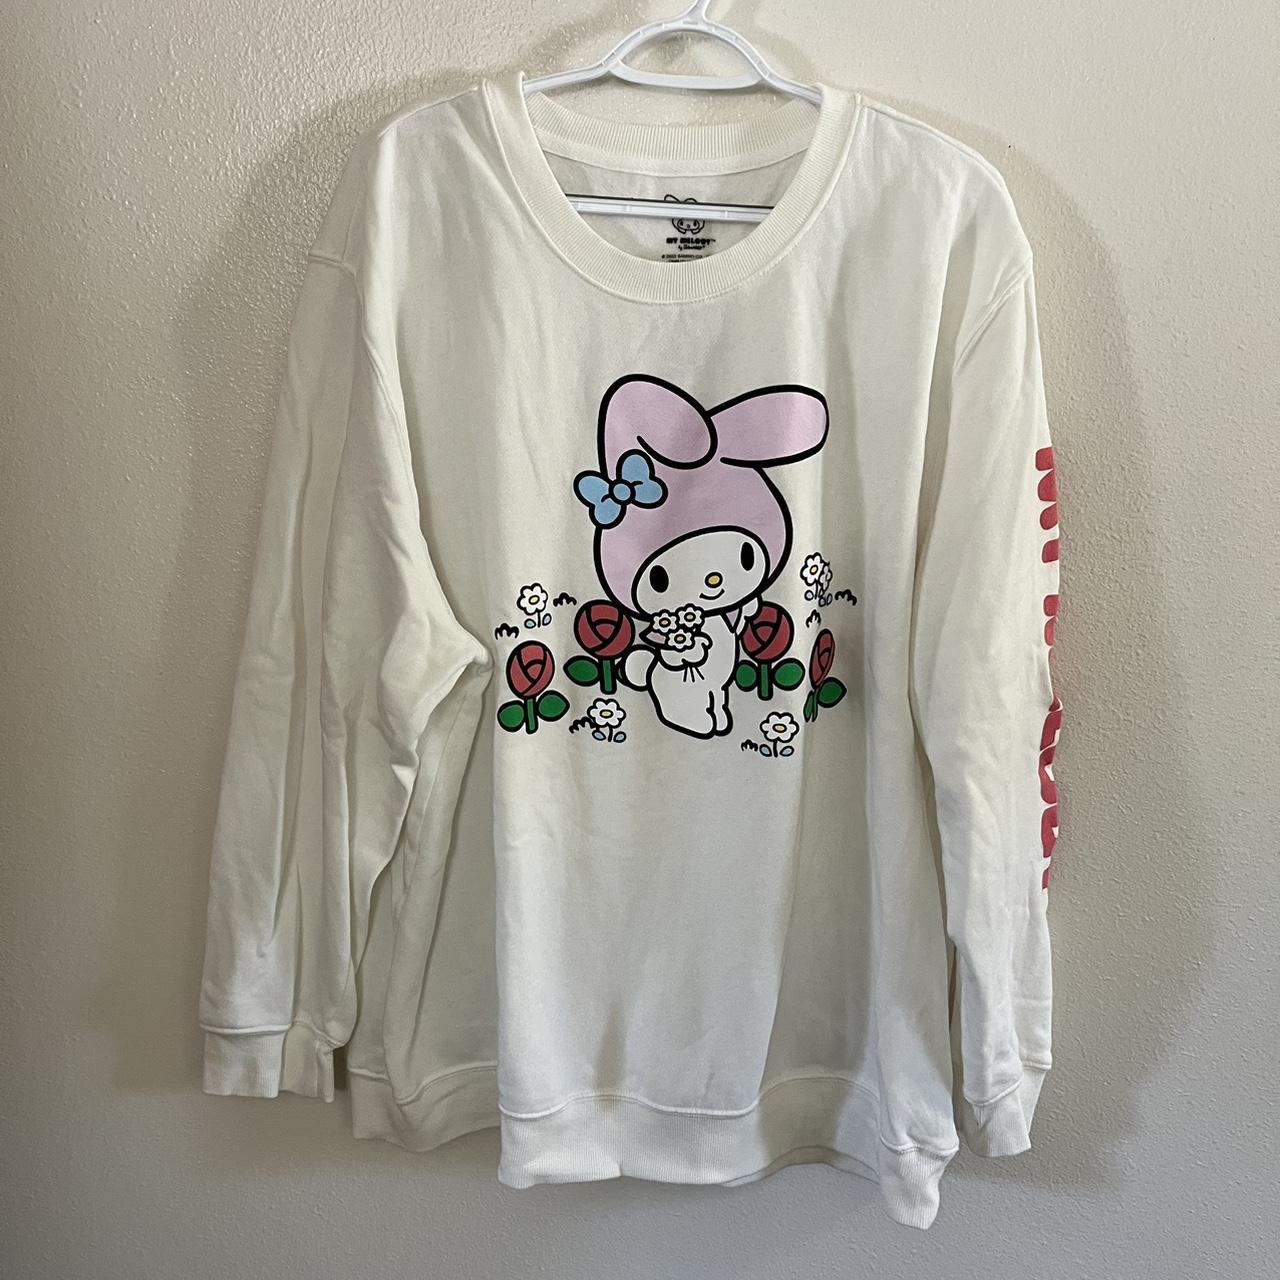 item listed by fltrdfinds